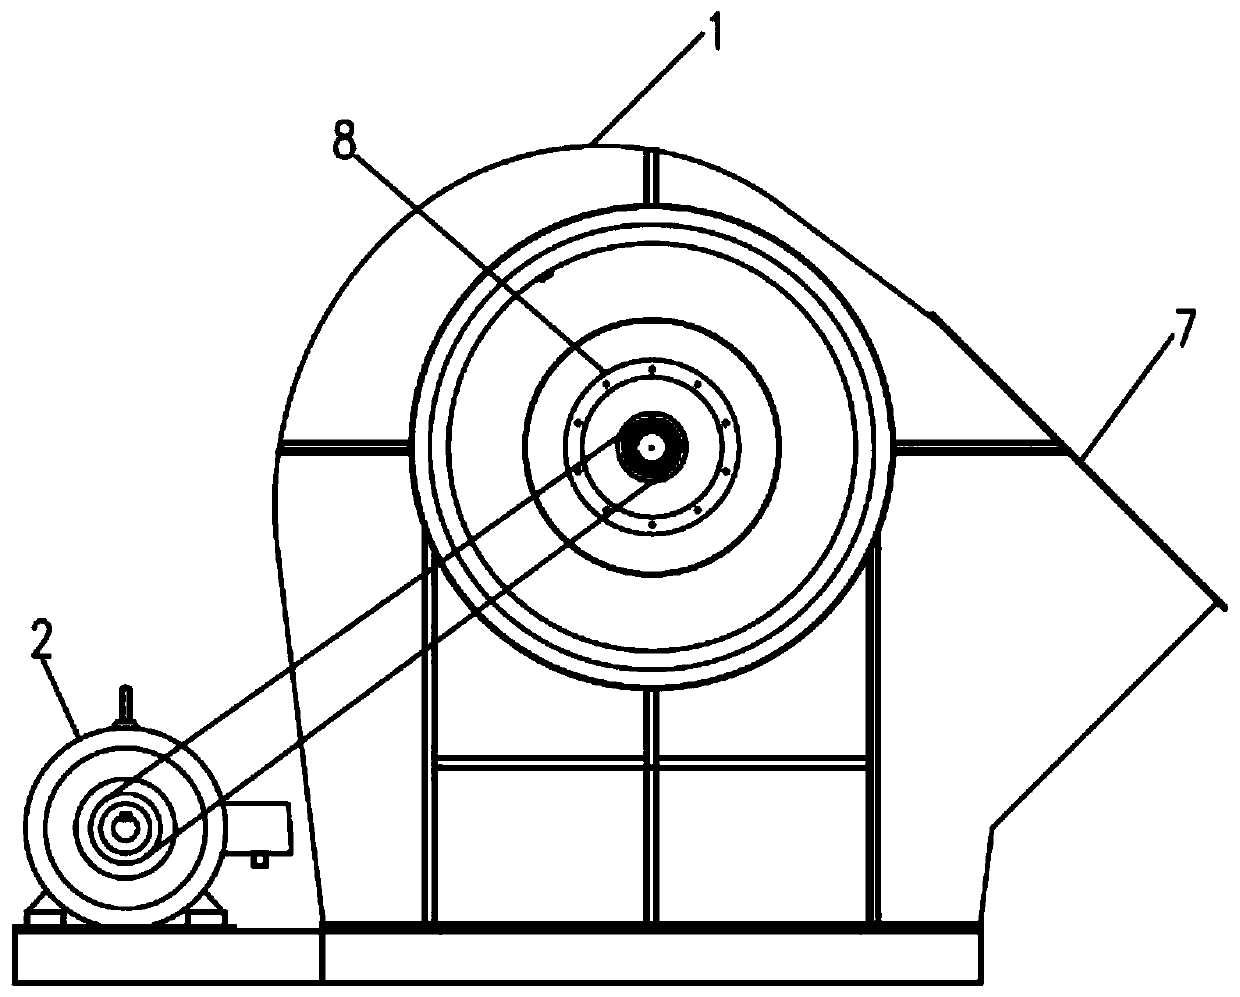 Rotary type air centrifugal force generating device for centrifugal fan